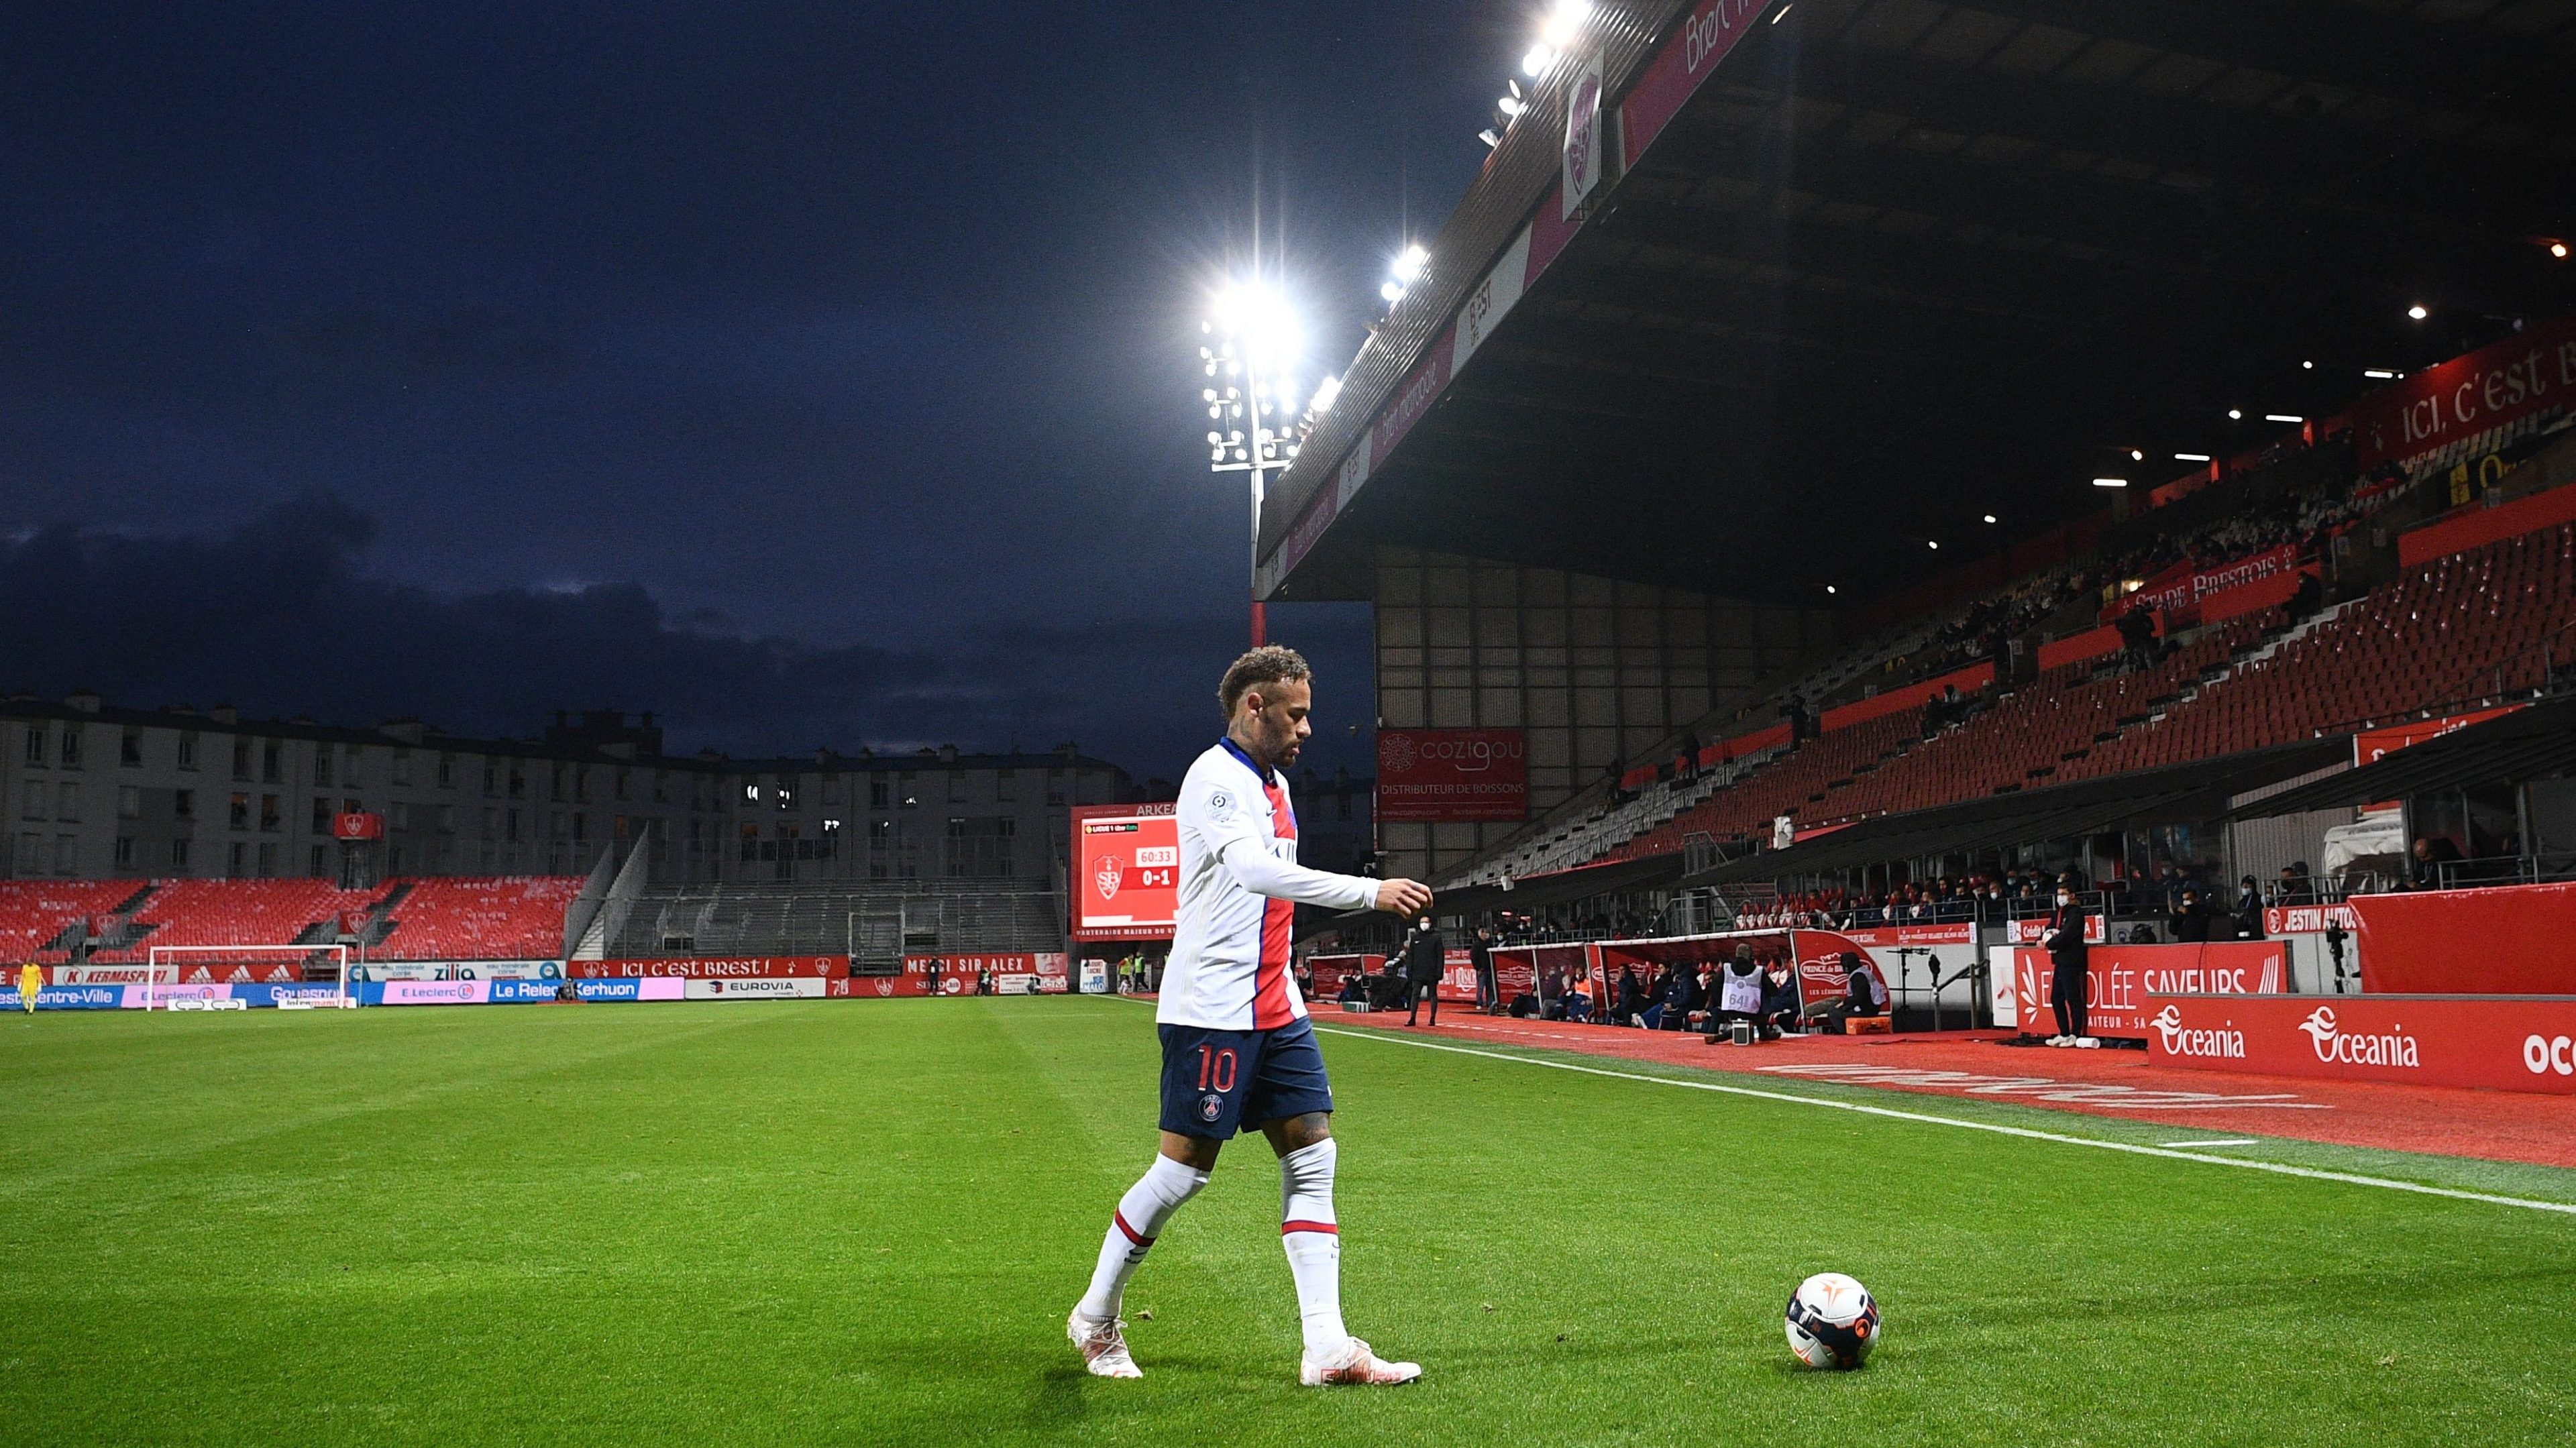 Paris Saint-Germain's Brazilian forward Neymar controls the ball during the French L1 football match between Brest and Paris Saint-Germain at the Stade Francis-Le Ble stadium, in Brest, western France, on May 23, 2021.